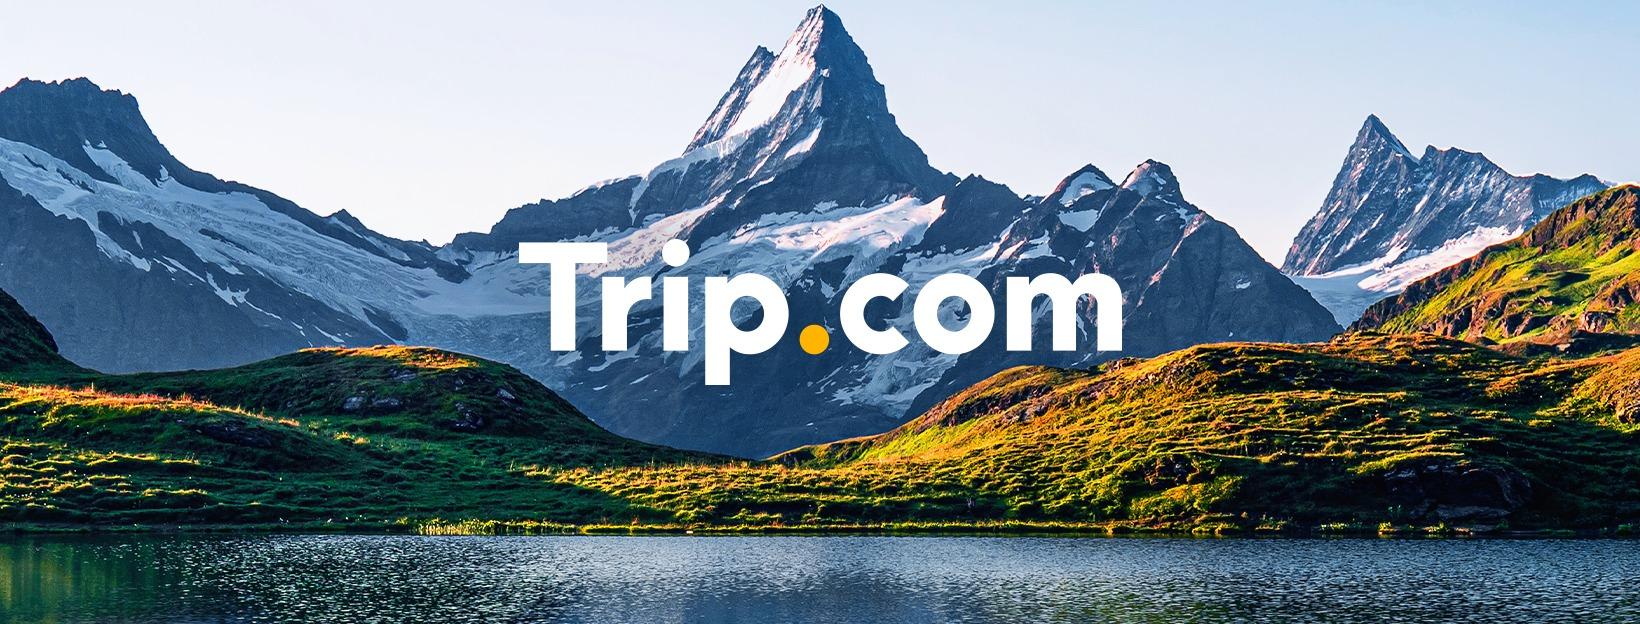 Up To 50% Off Flights & Hotels at Trip.com